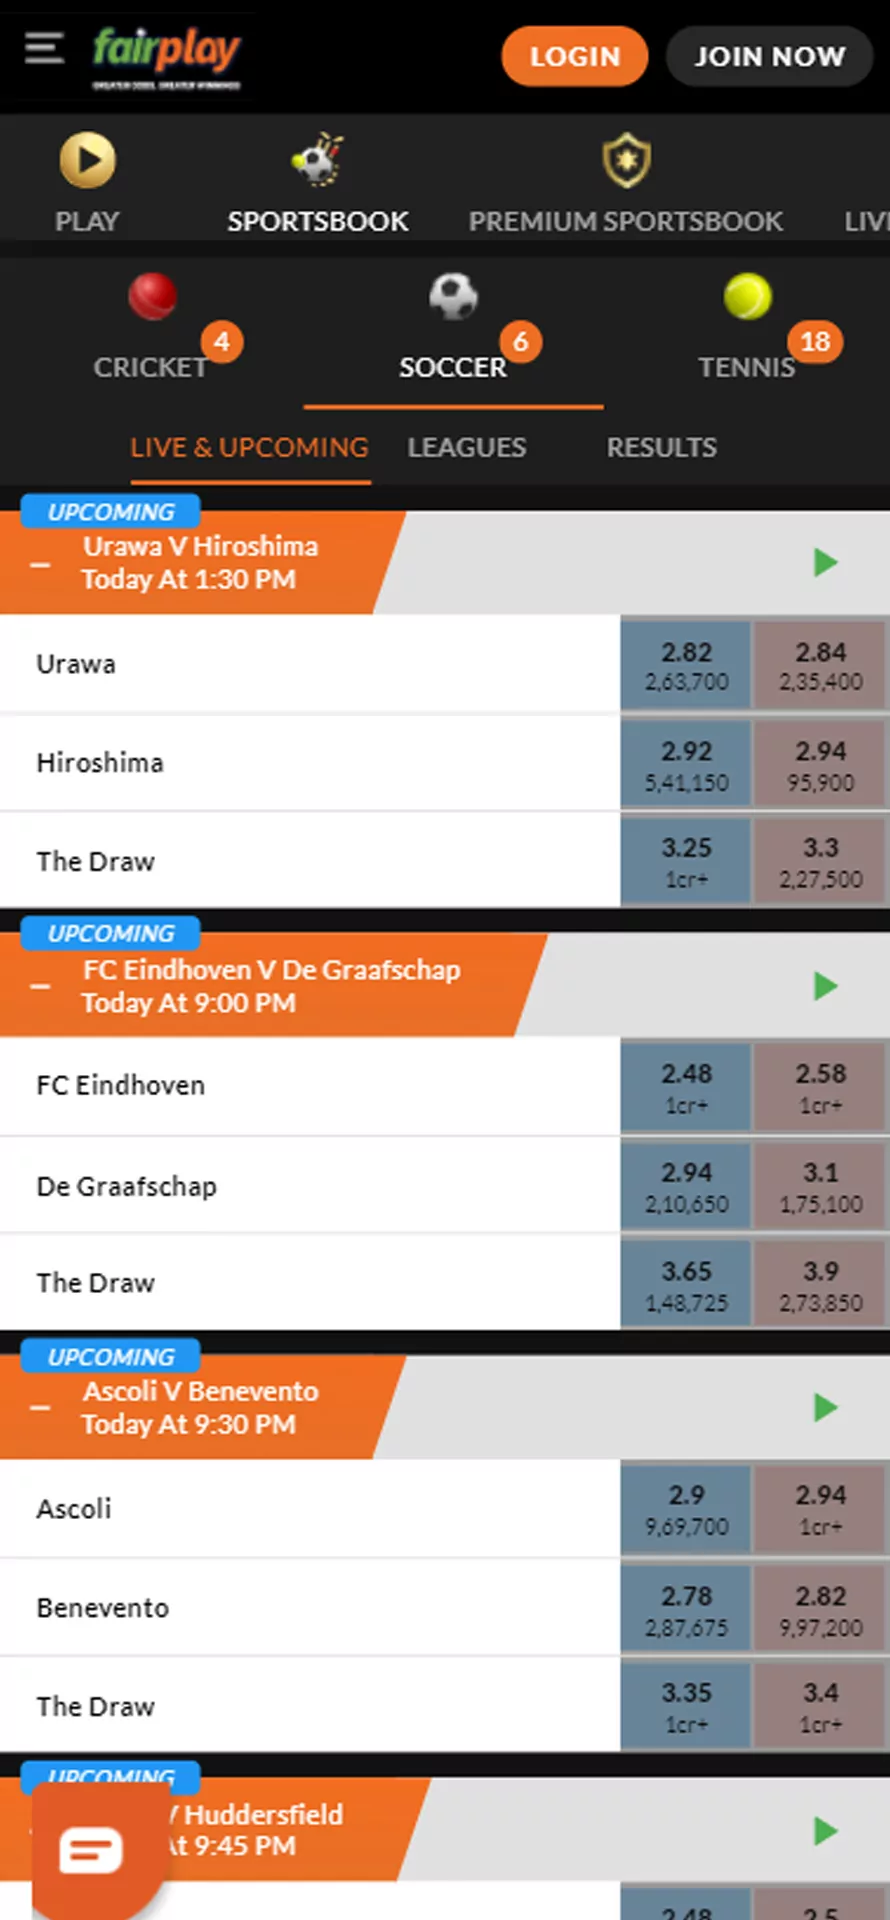 The sports betting section of the Fairplay app.